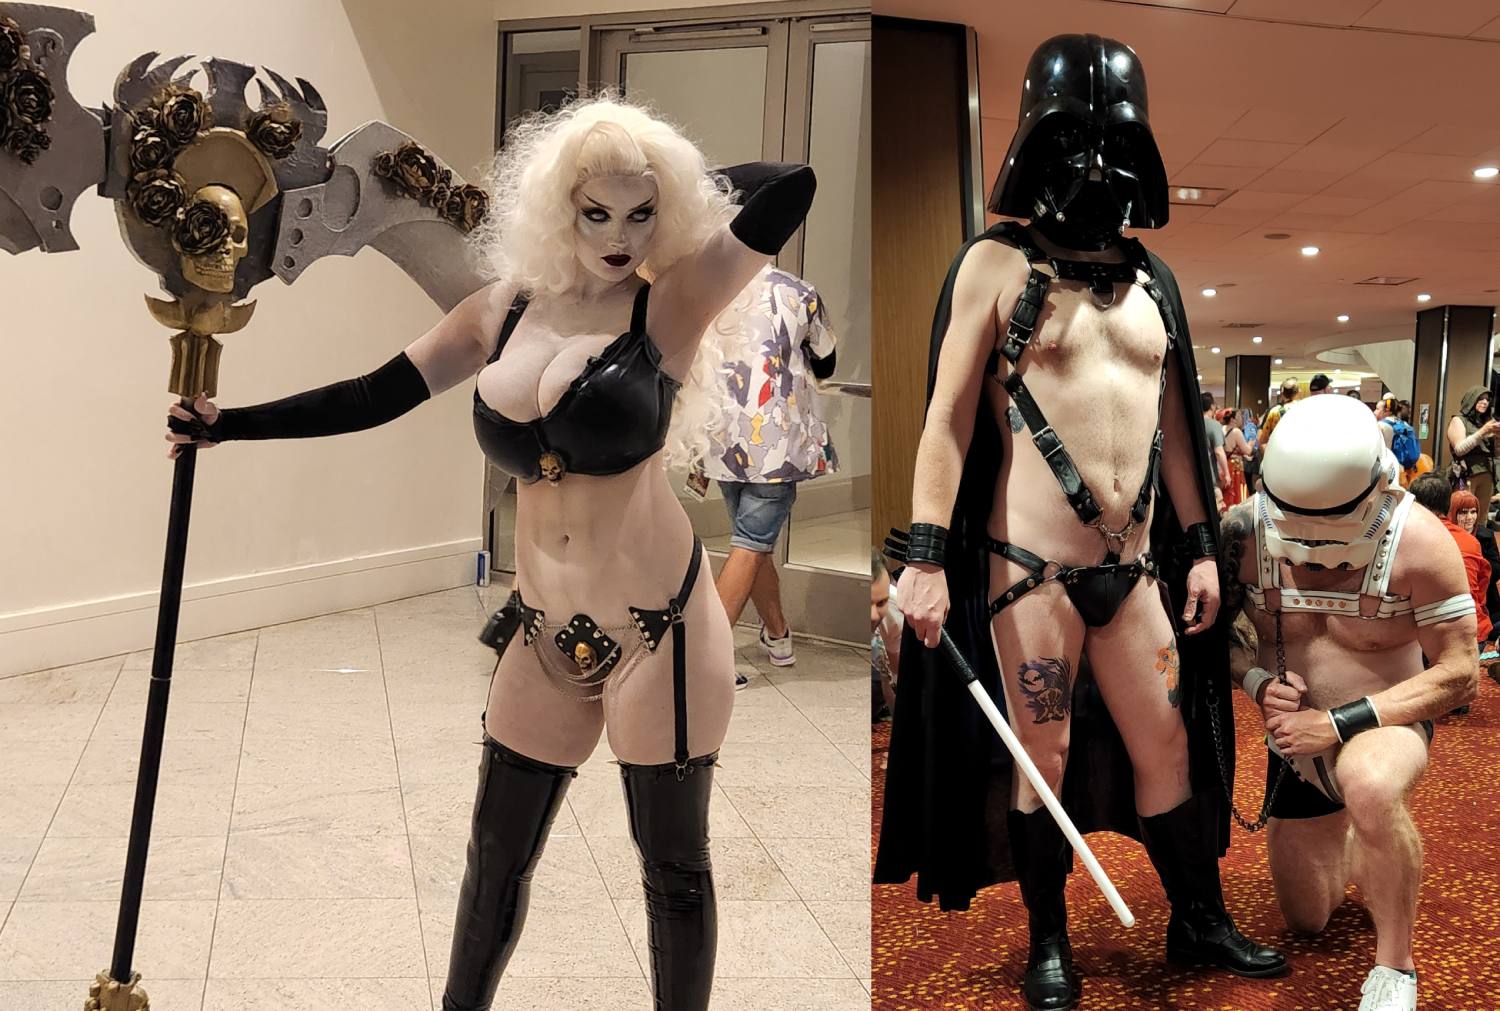 Cosplay Nerd Porn - Nerdy & Dirty: The Sexual Escapades of Comic Book Conventions -  Philadelphia Weekly